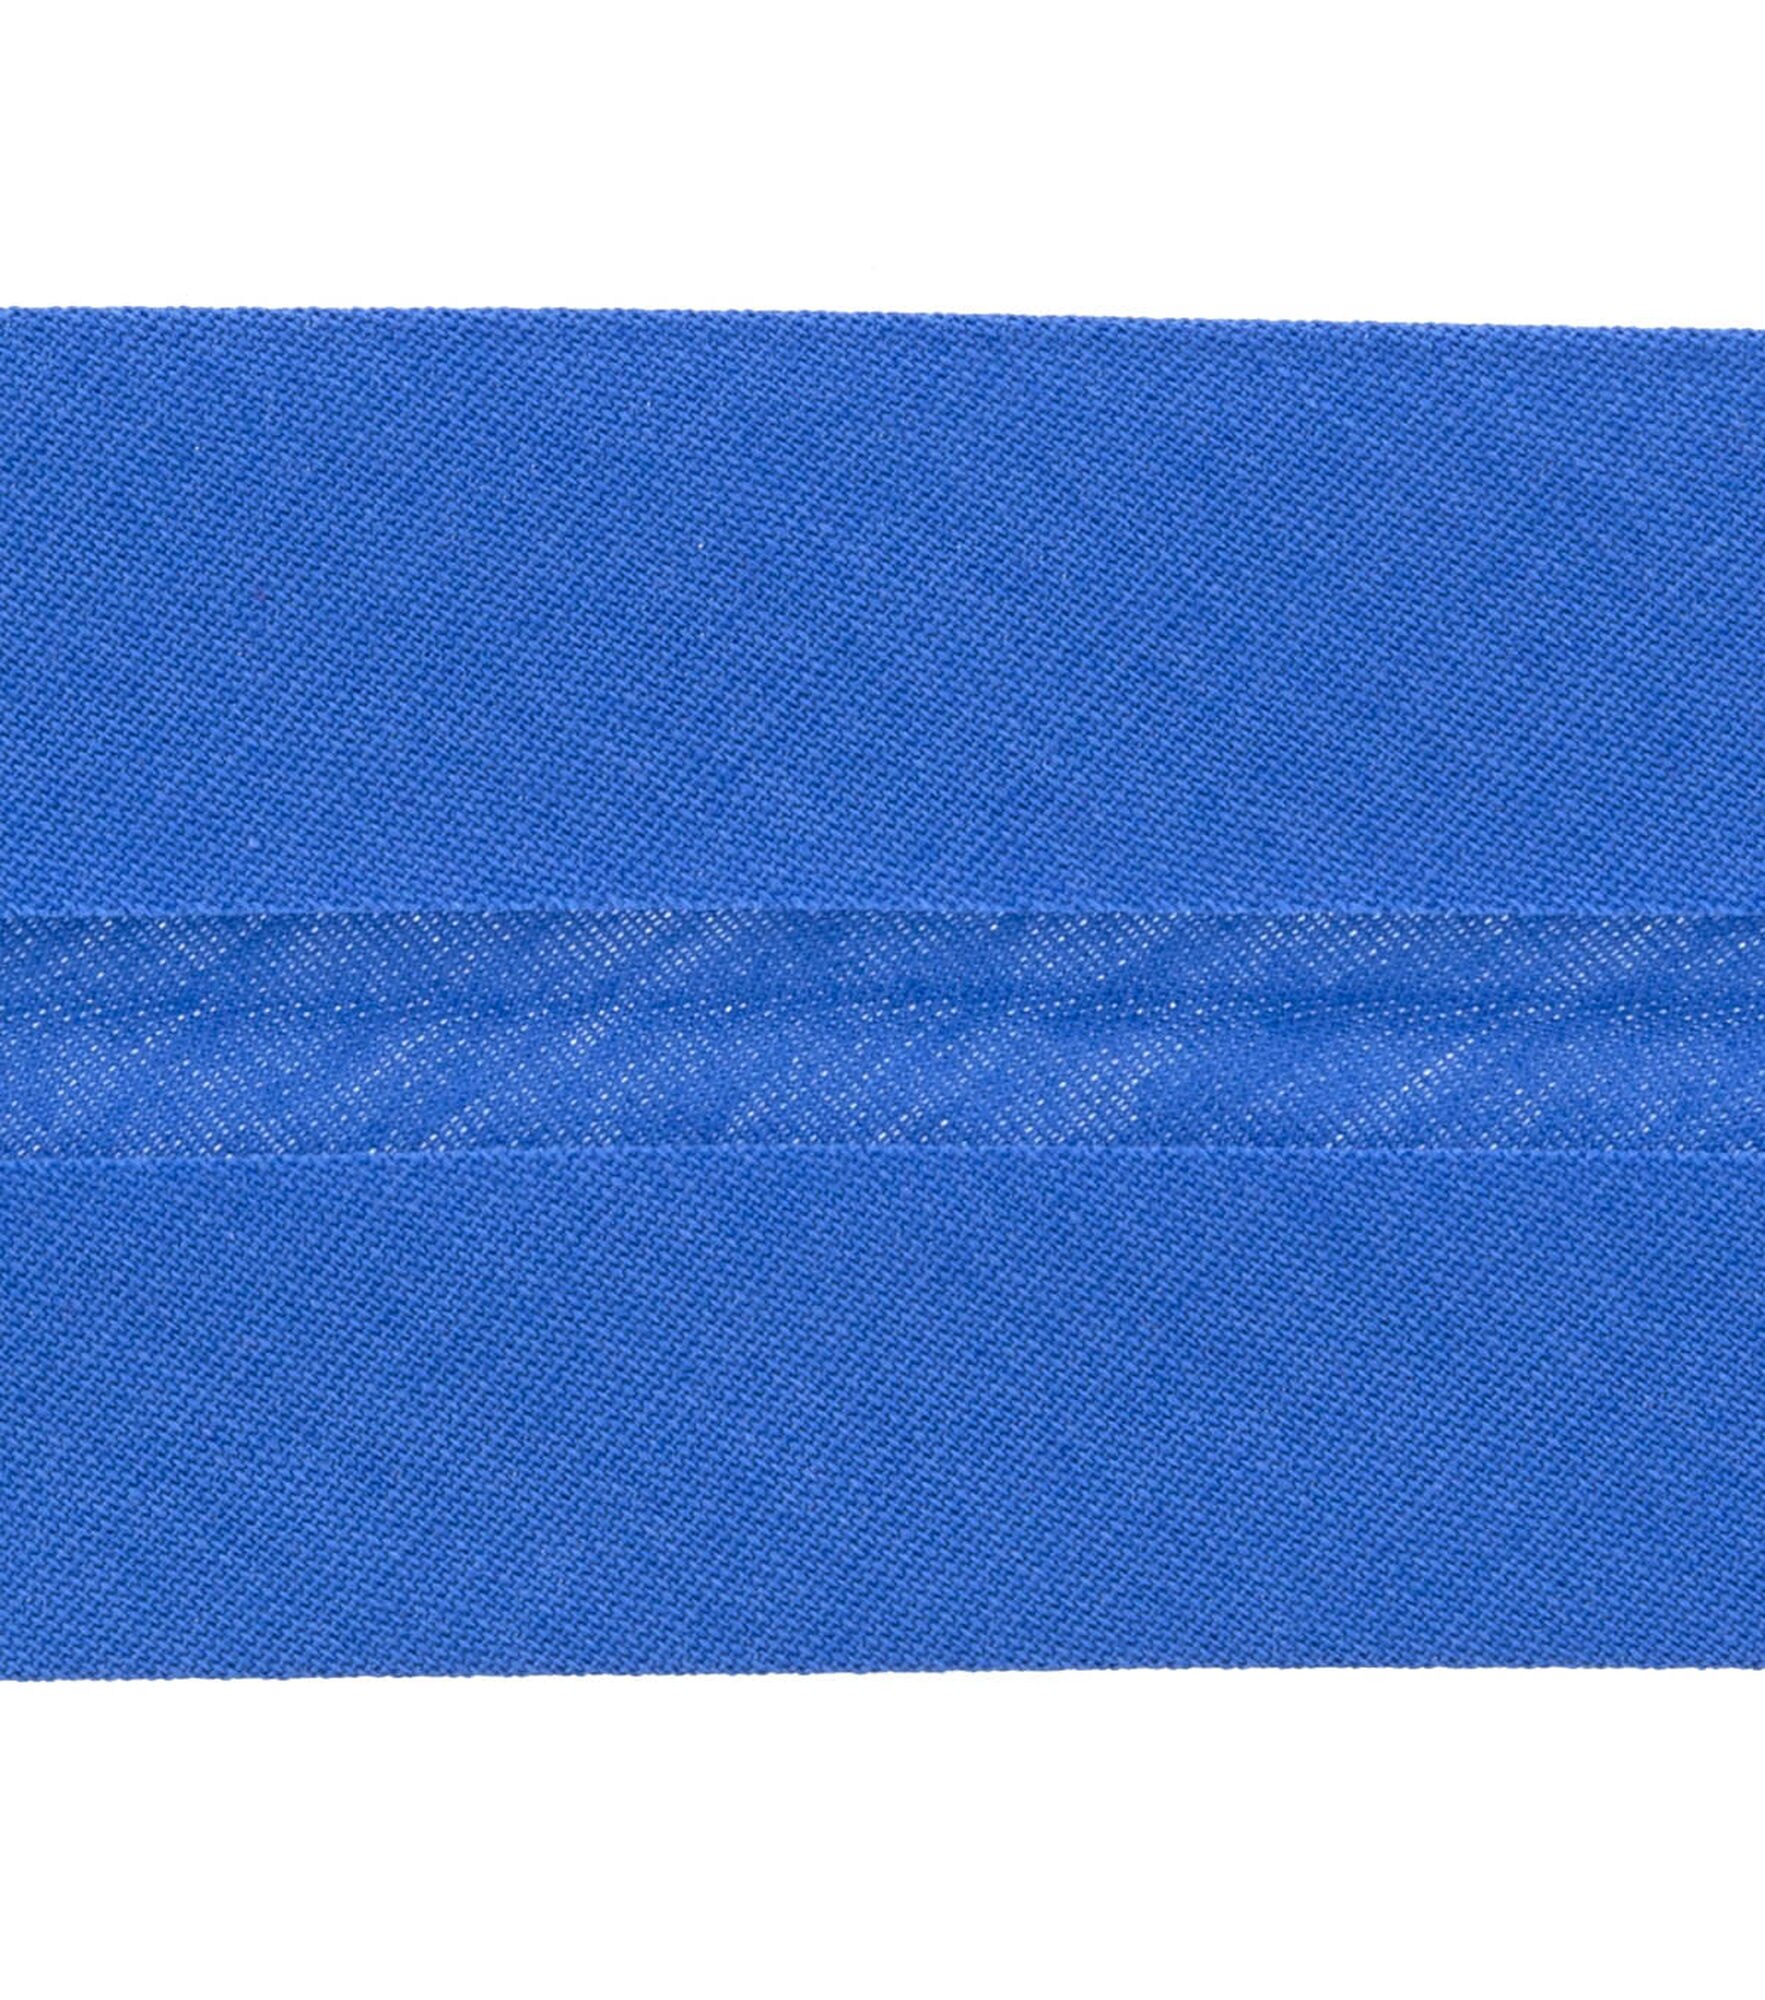 Wrights 7/8" x 3yd Double Fold Quilt Binding, Royal, hi-res